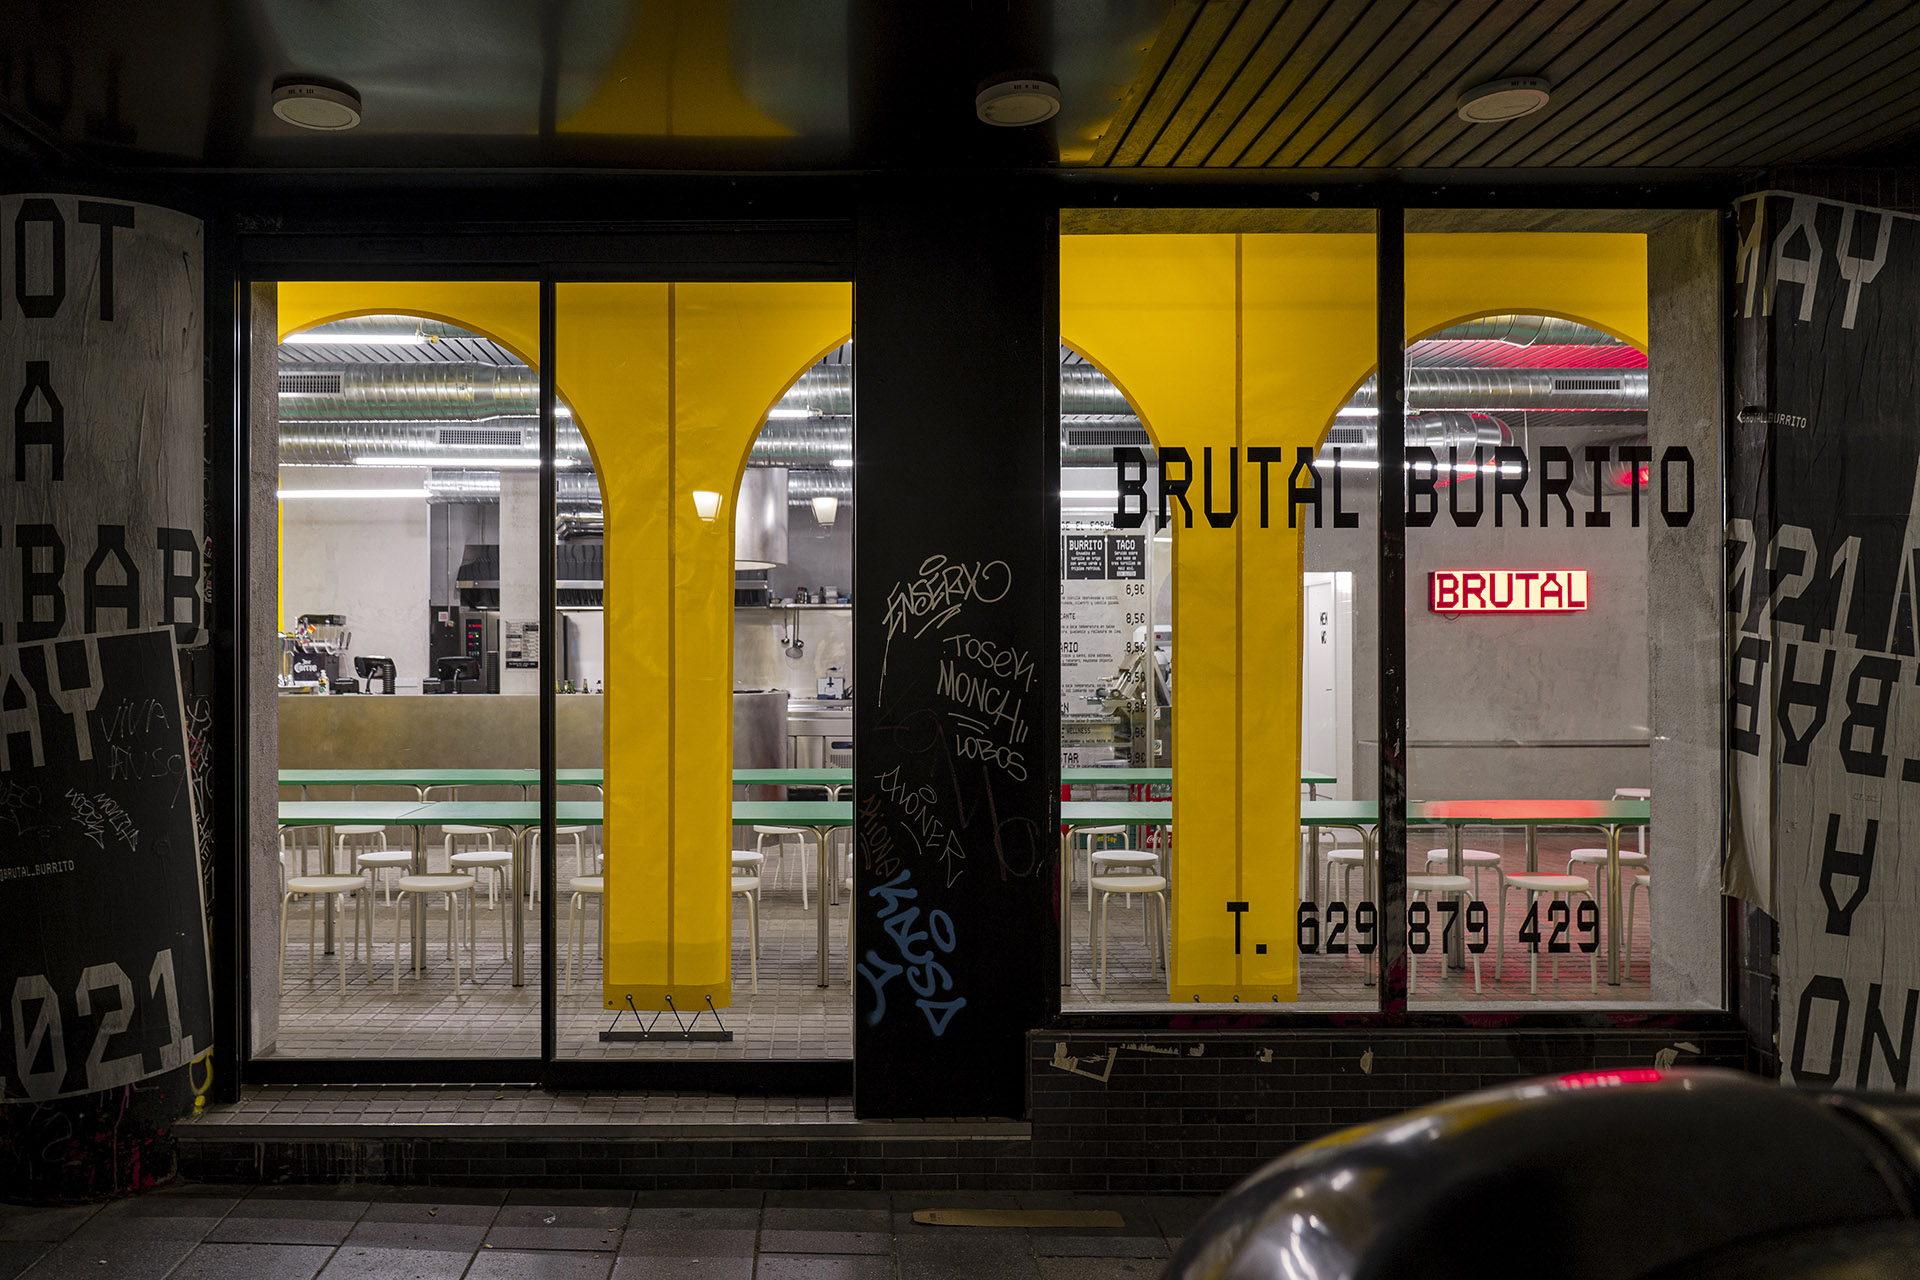 The Space to be dressed as a body. Spontaneity and reversibility in the design of the Brutal Burrito restaurant